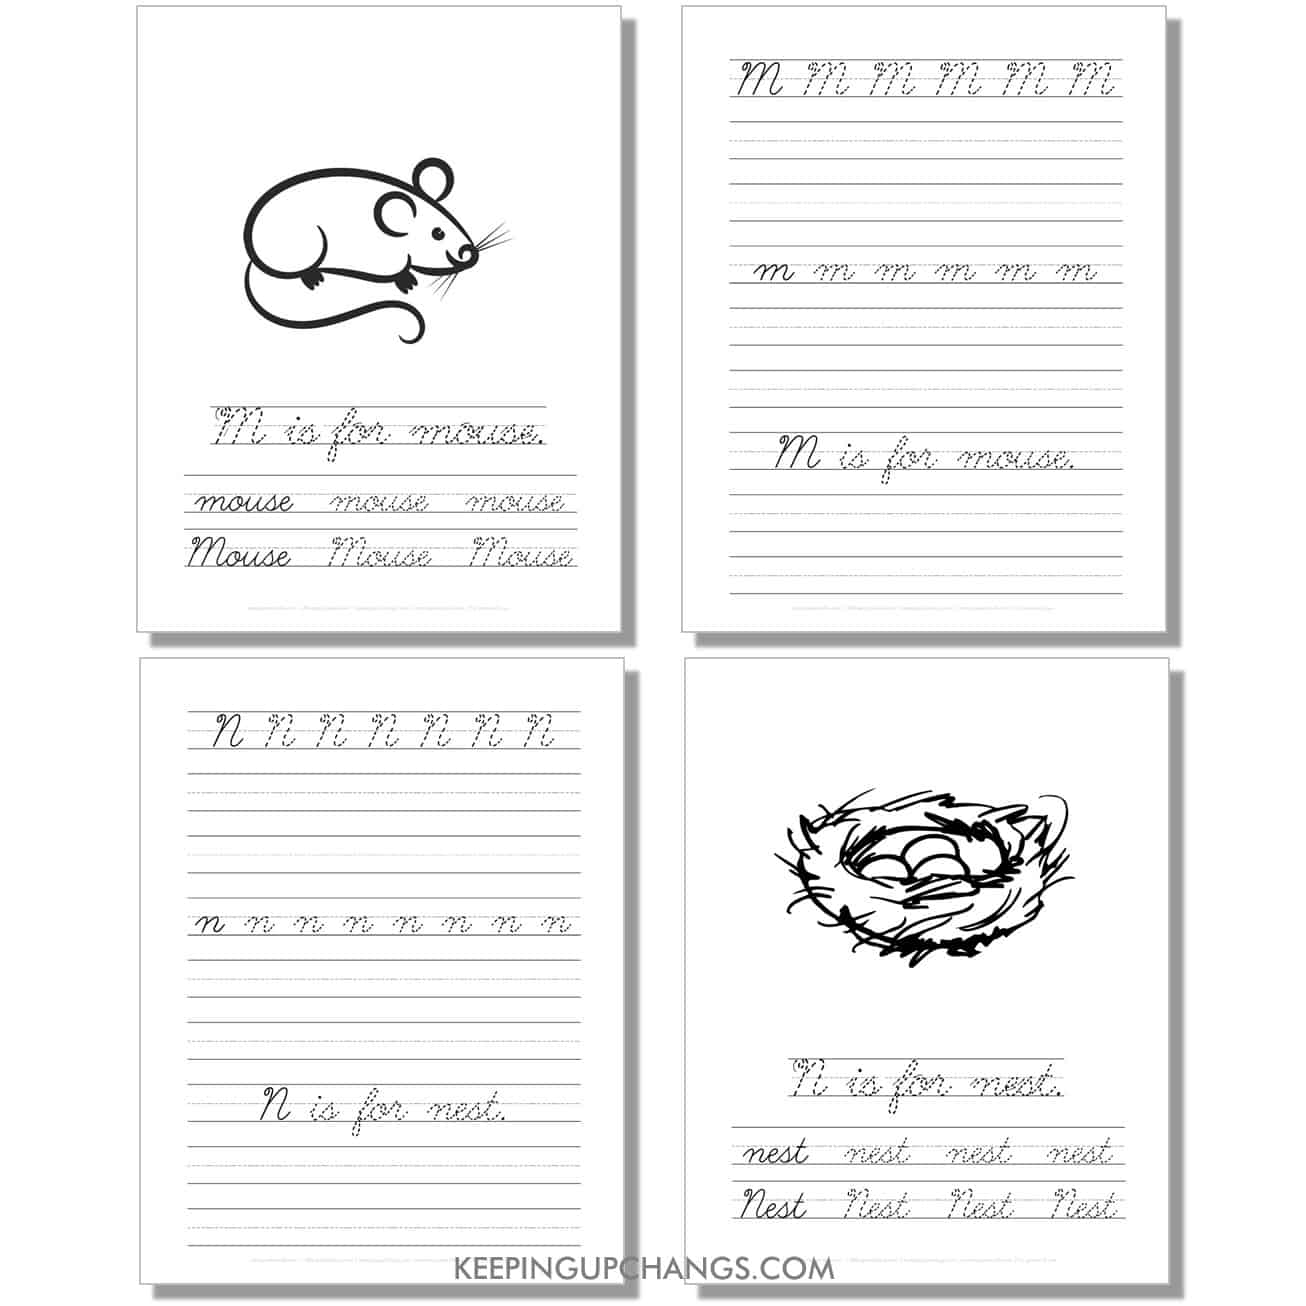 cursive worksheet with uppercase, lowercase letters, sentence for m ,n.